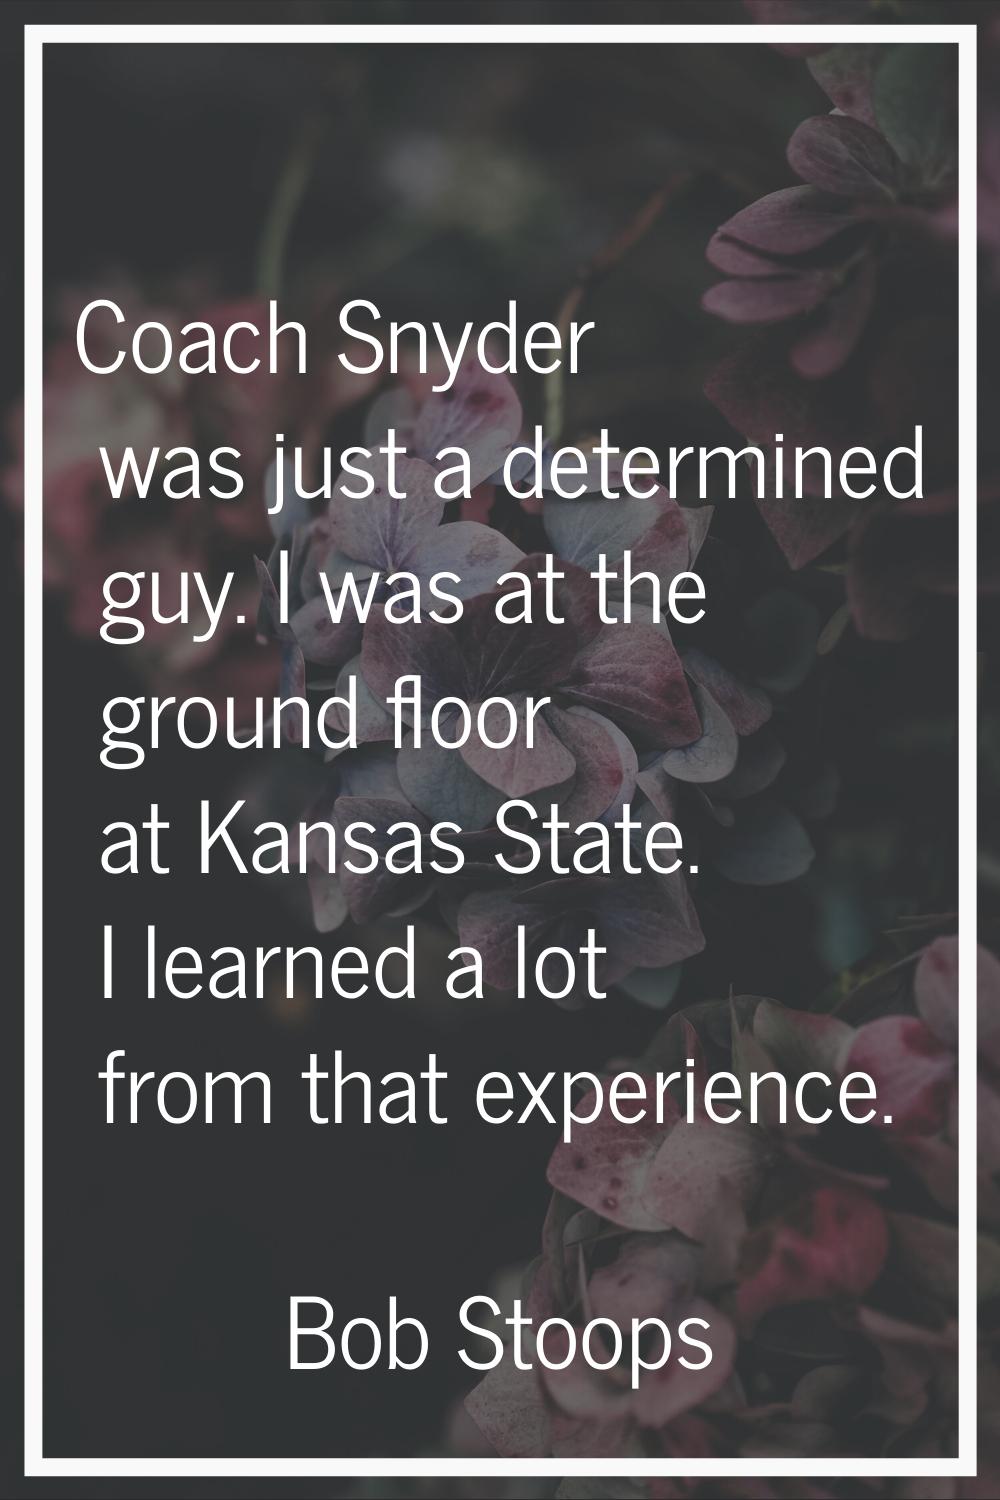 Coach Snyder was just a determined guy. I was at the ground floor at Kansas State. I learned a lot 